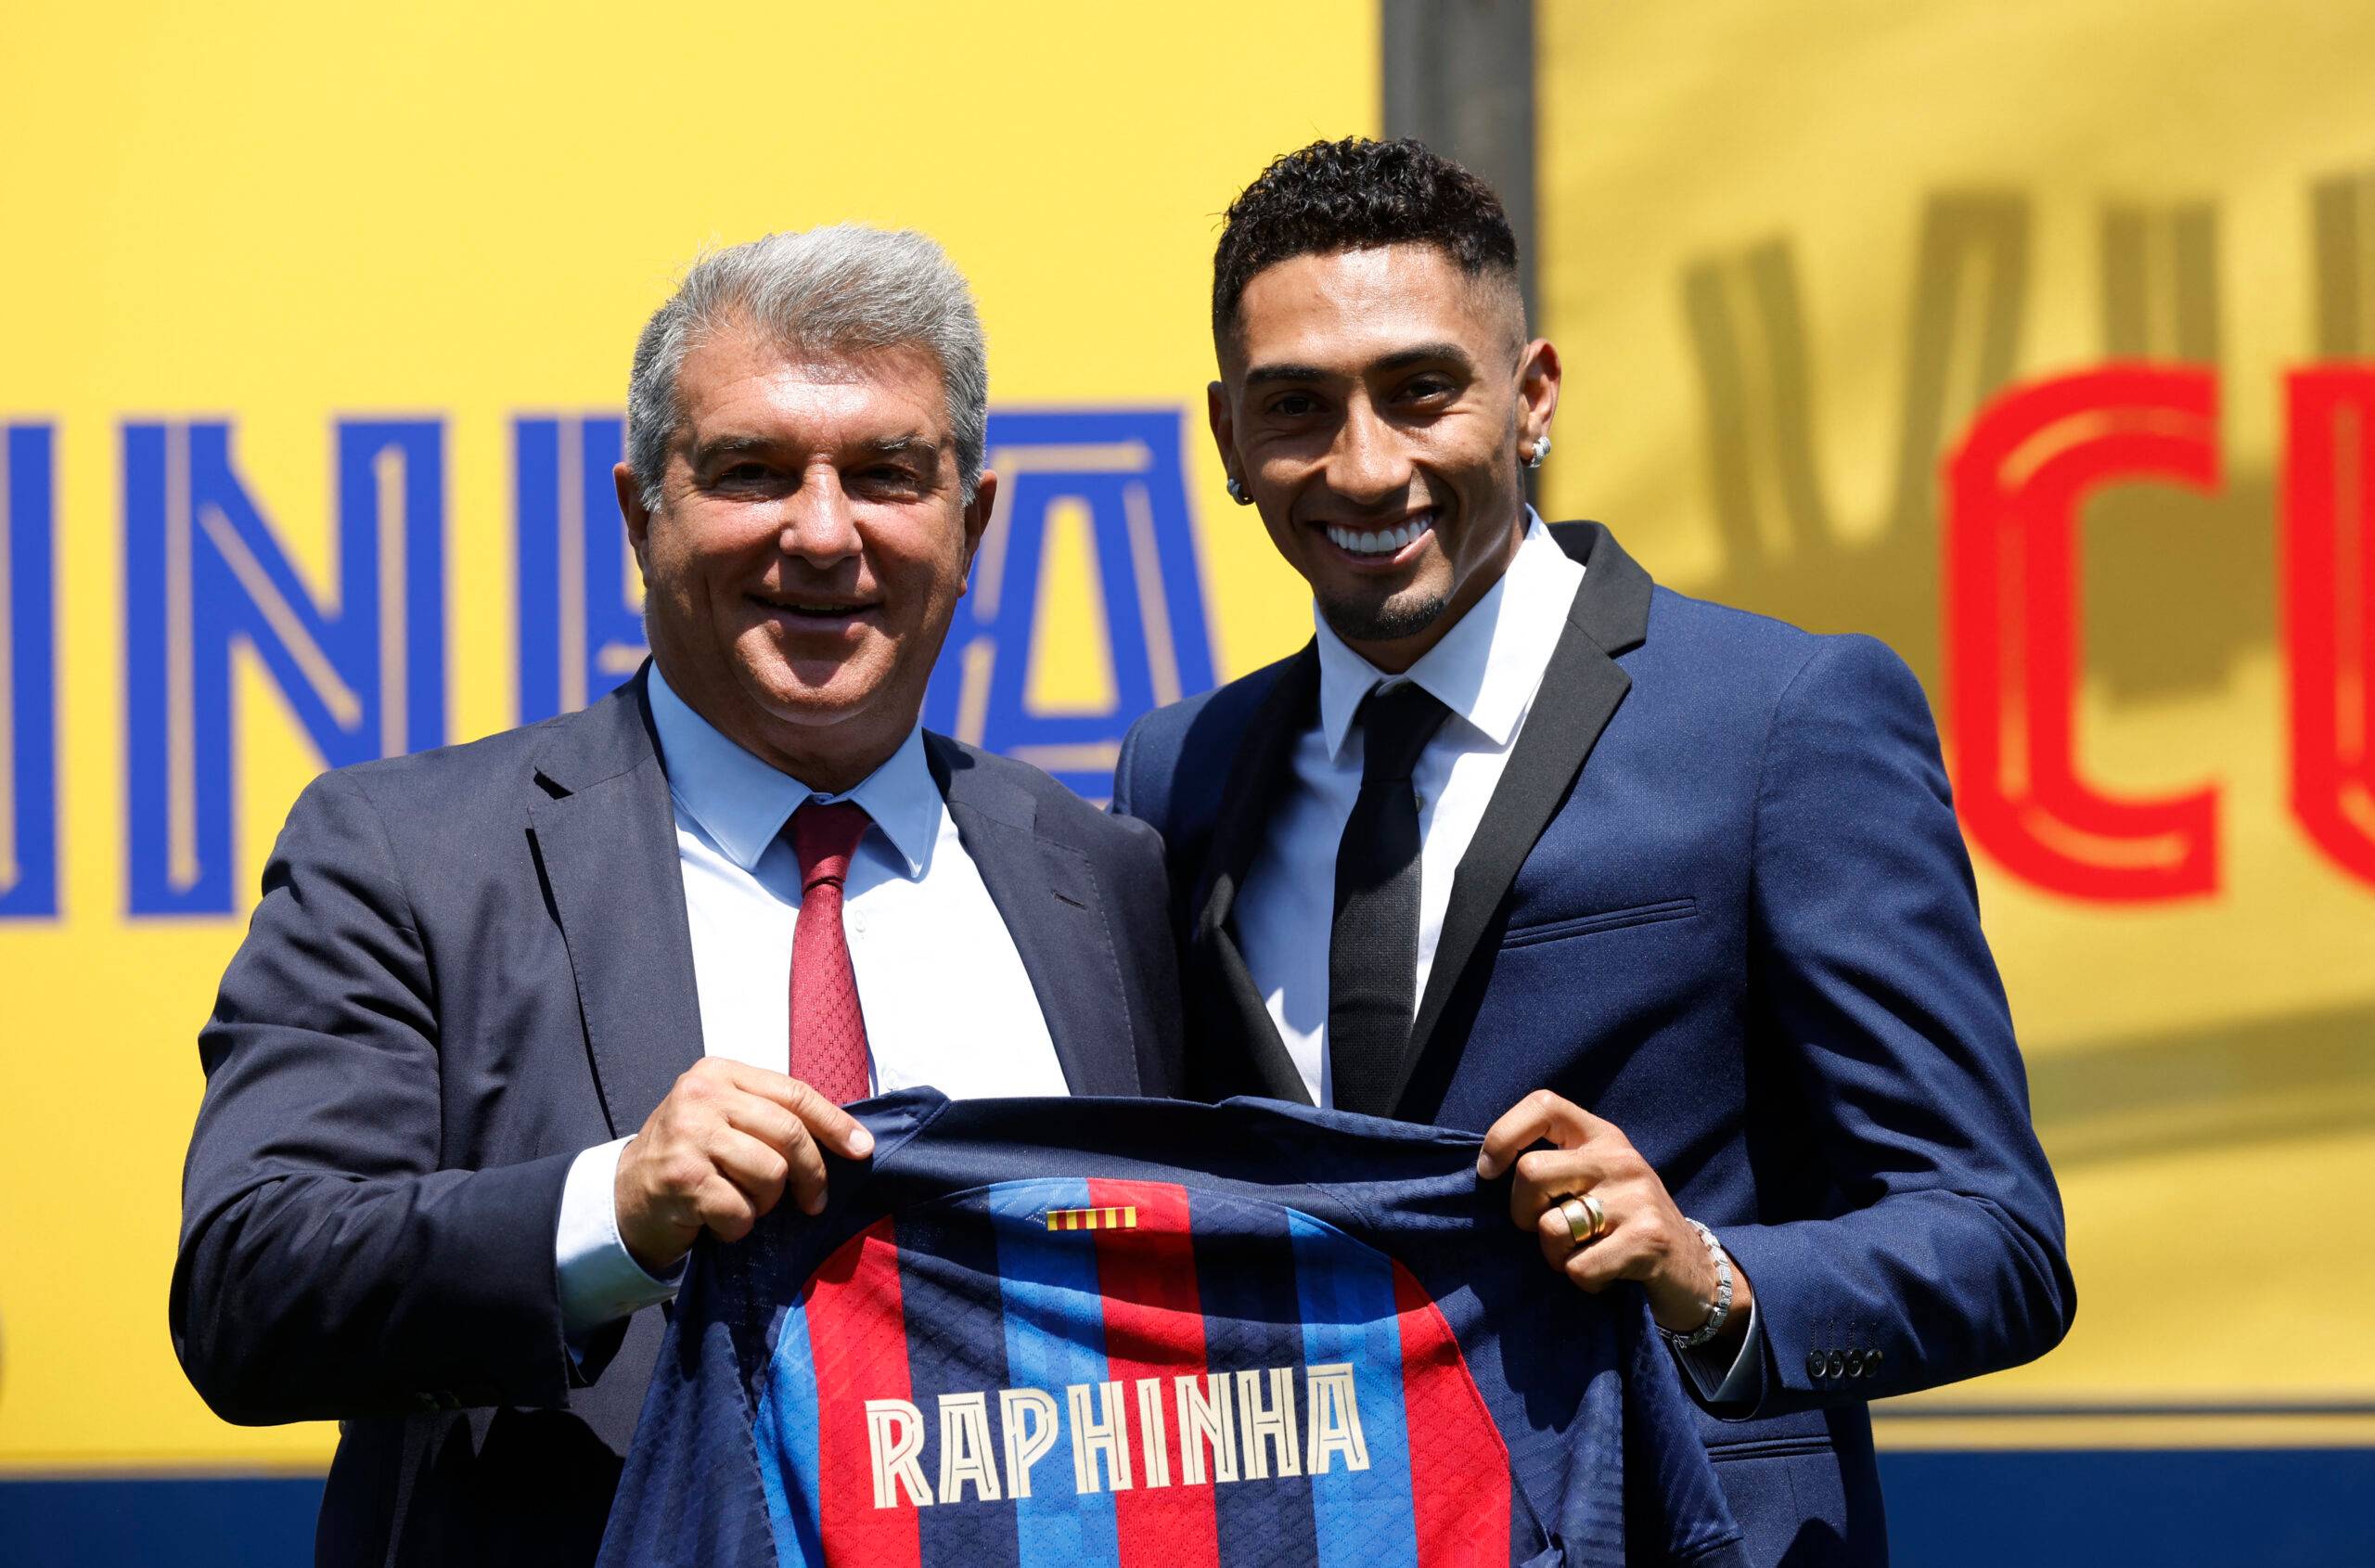 Raphinha signs for Barcelona.